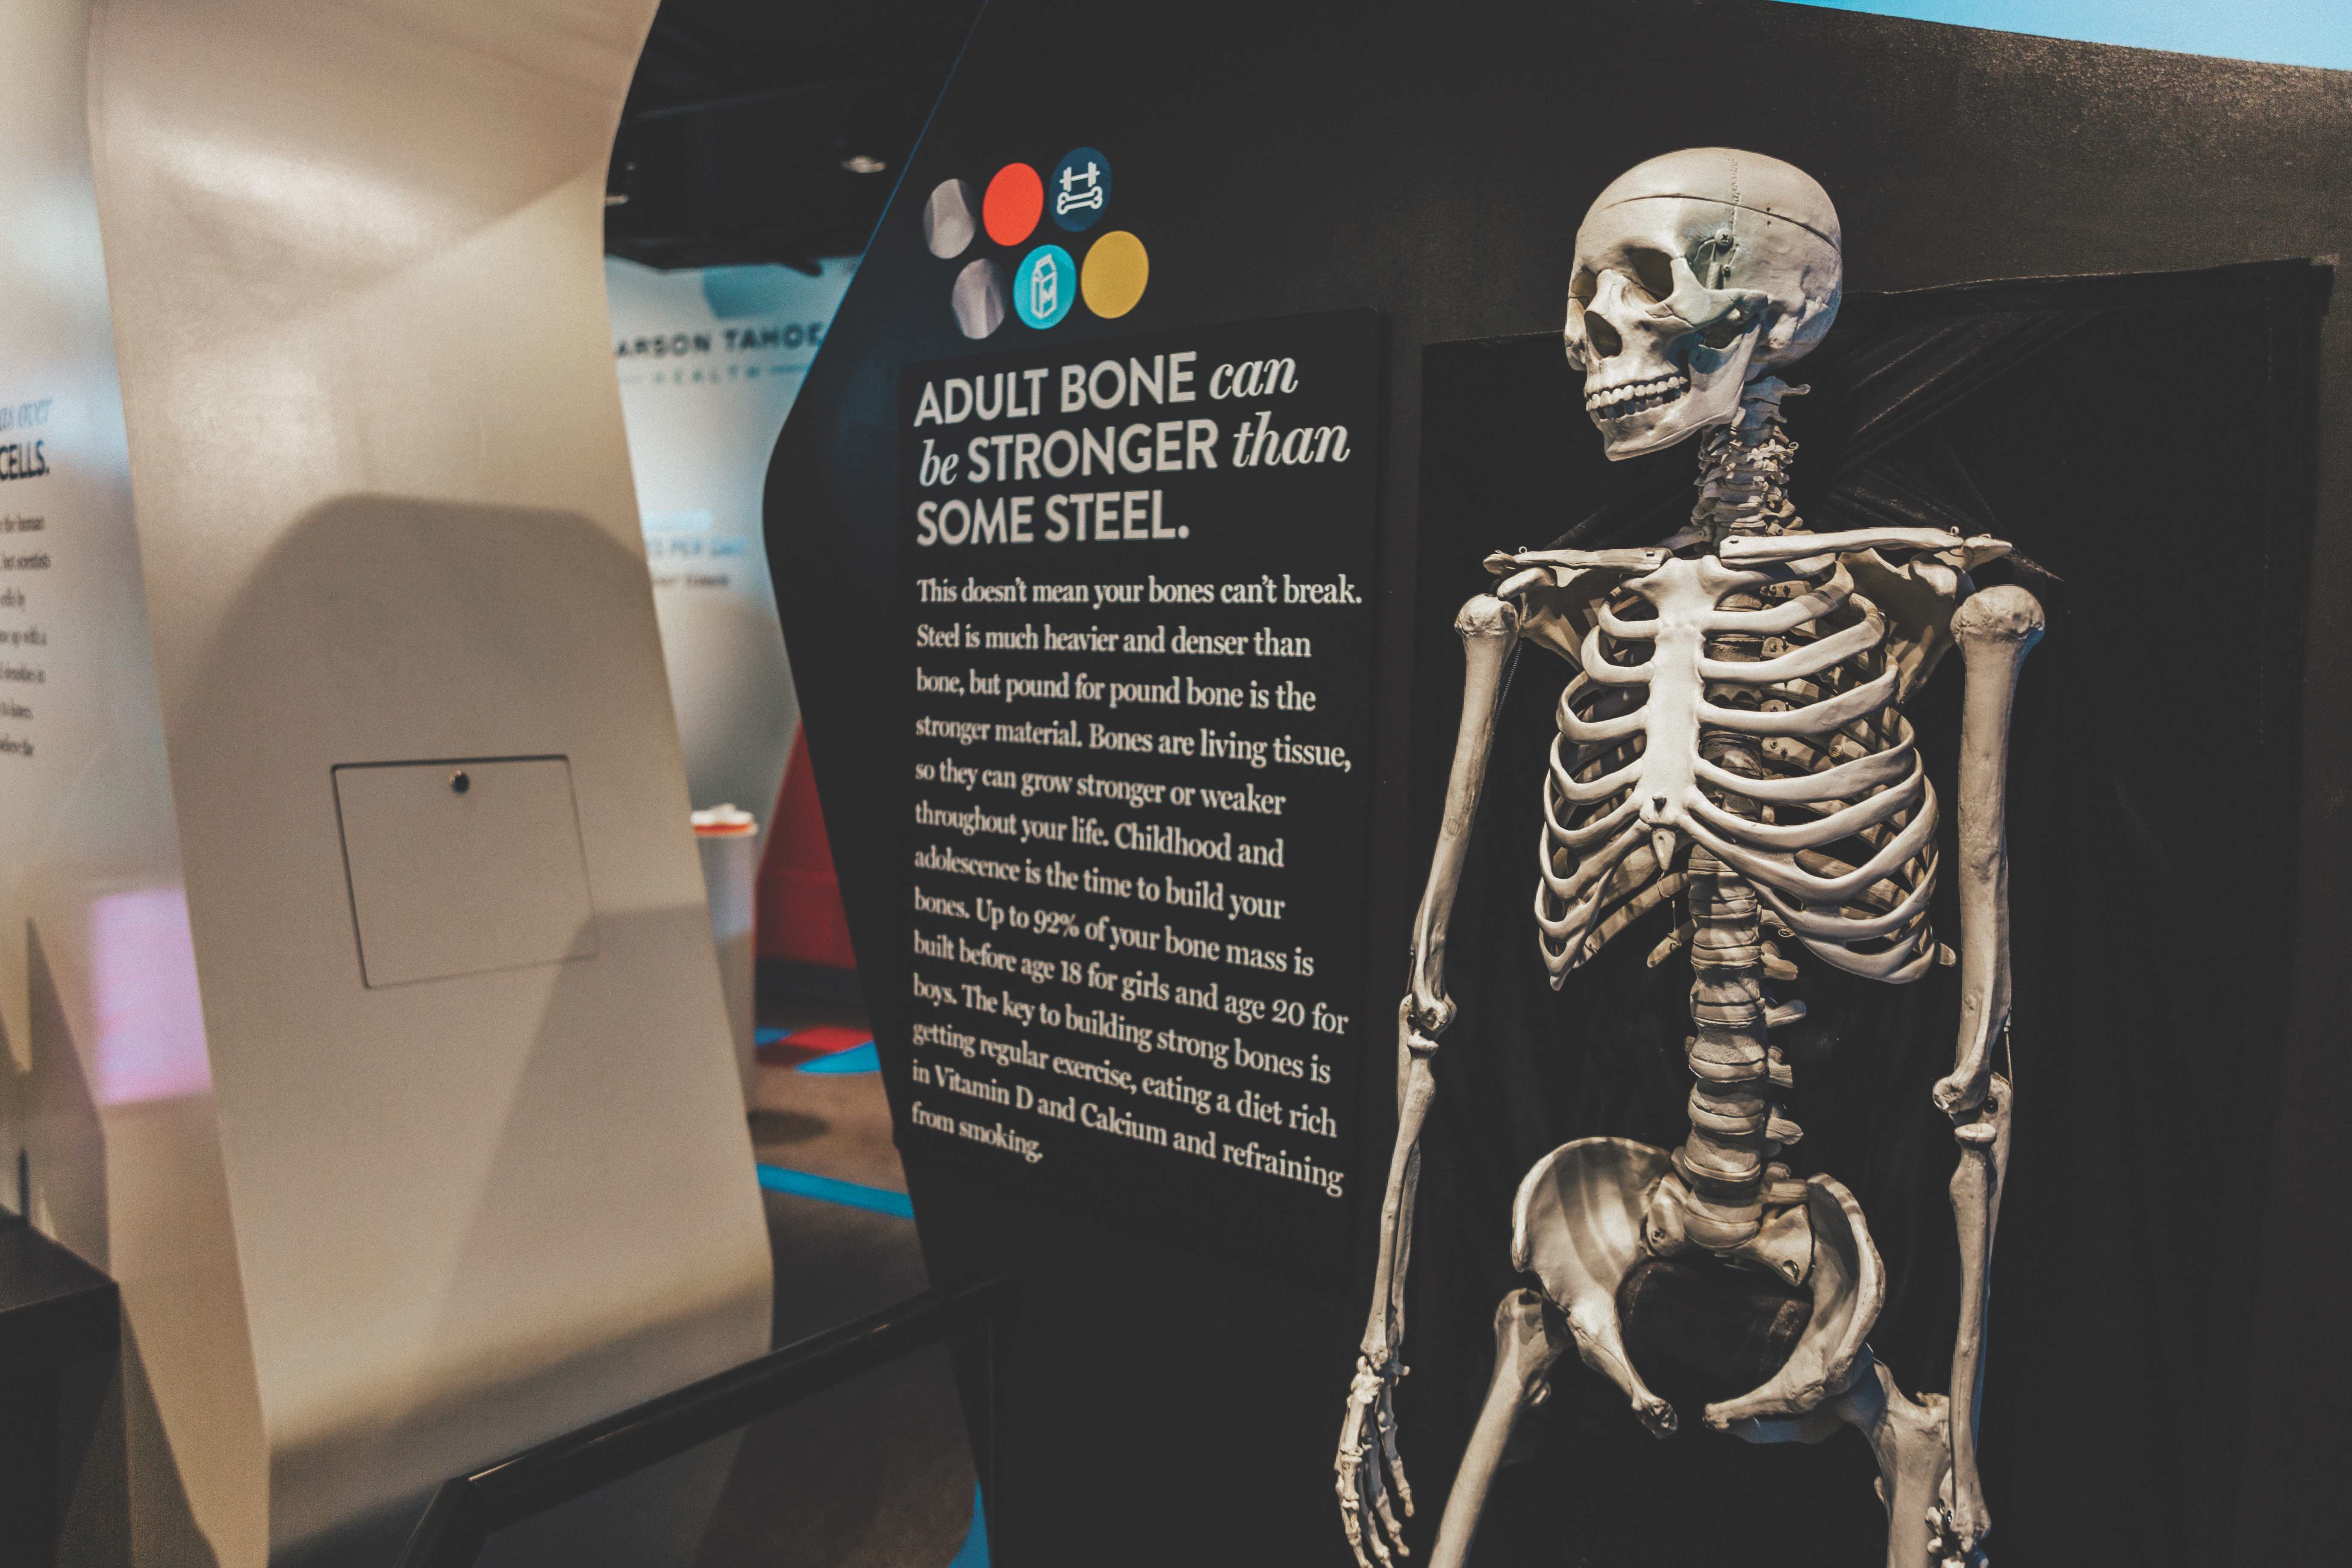 a Skeleton and poster about the adult bone